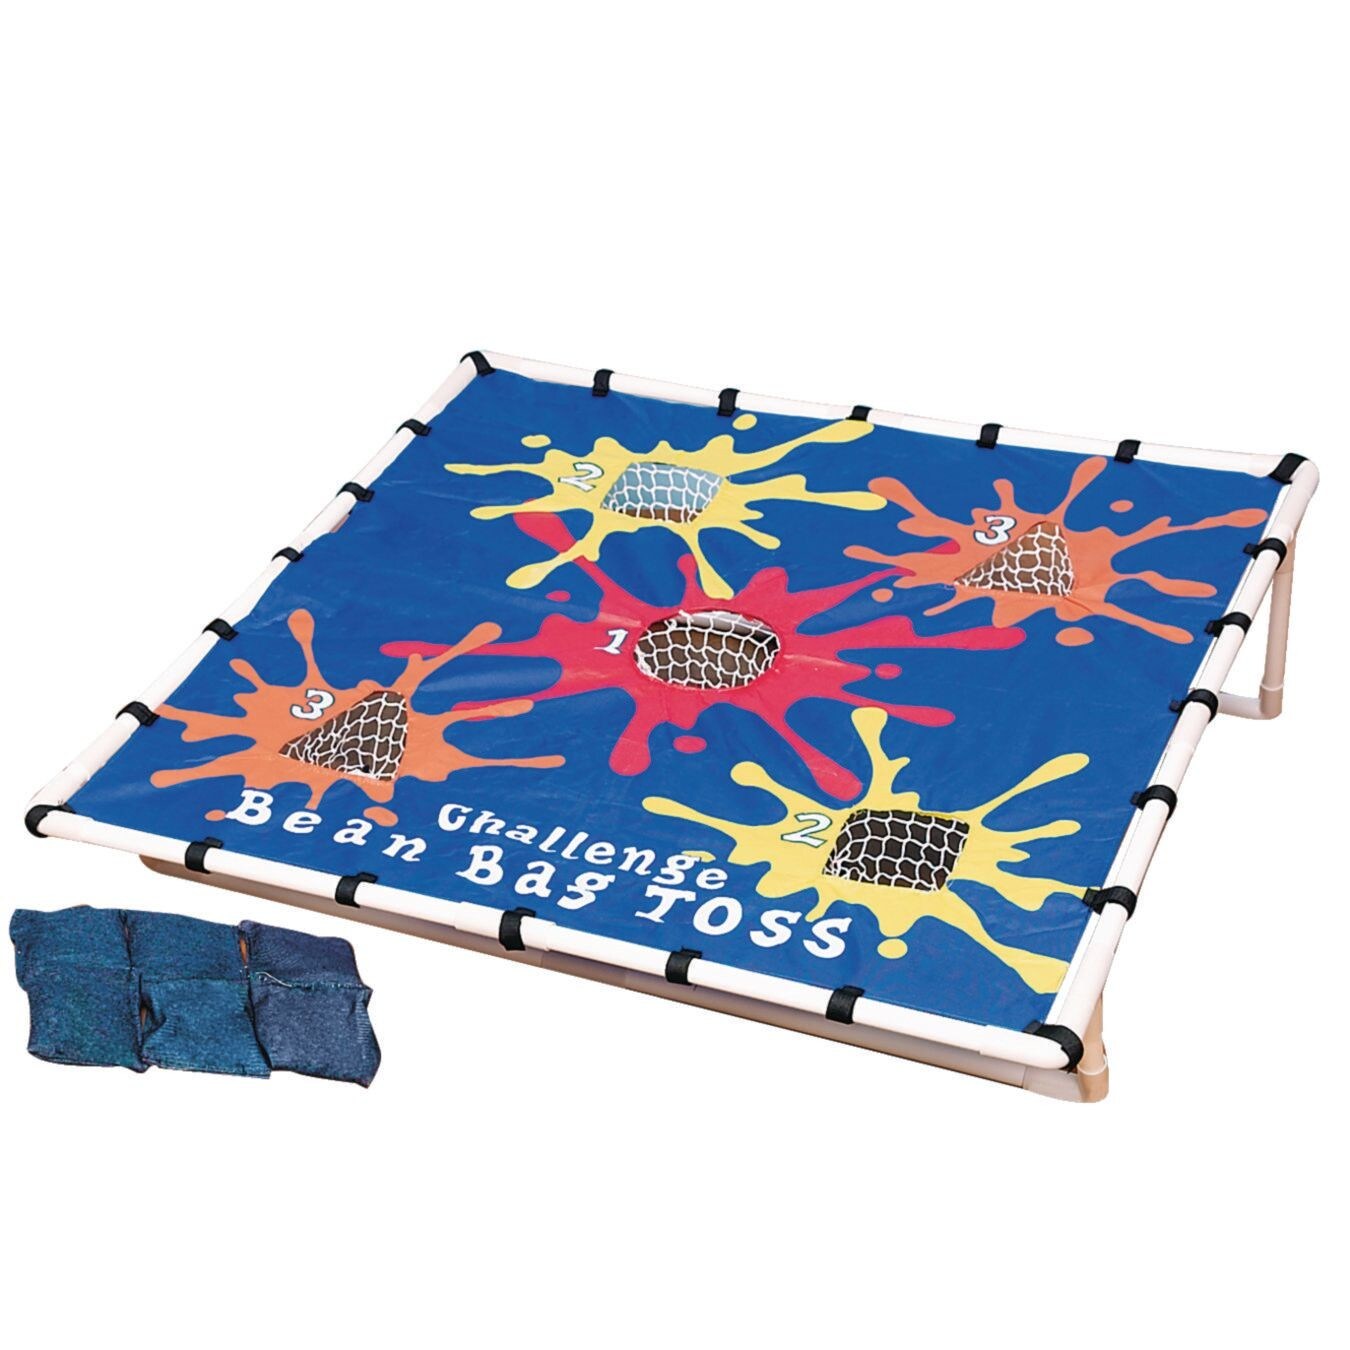 S&#x26;S Worldwide Beanbag Target Toss Challenge. Includes a Large 40&#x22; x 40&#x22; x 17&#x22; H Target with Frame / Stand, 6 Bean Bags and a Storage Bag.